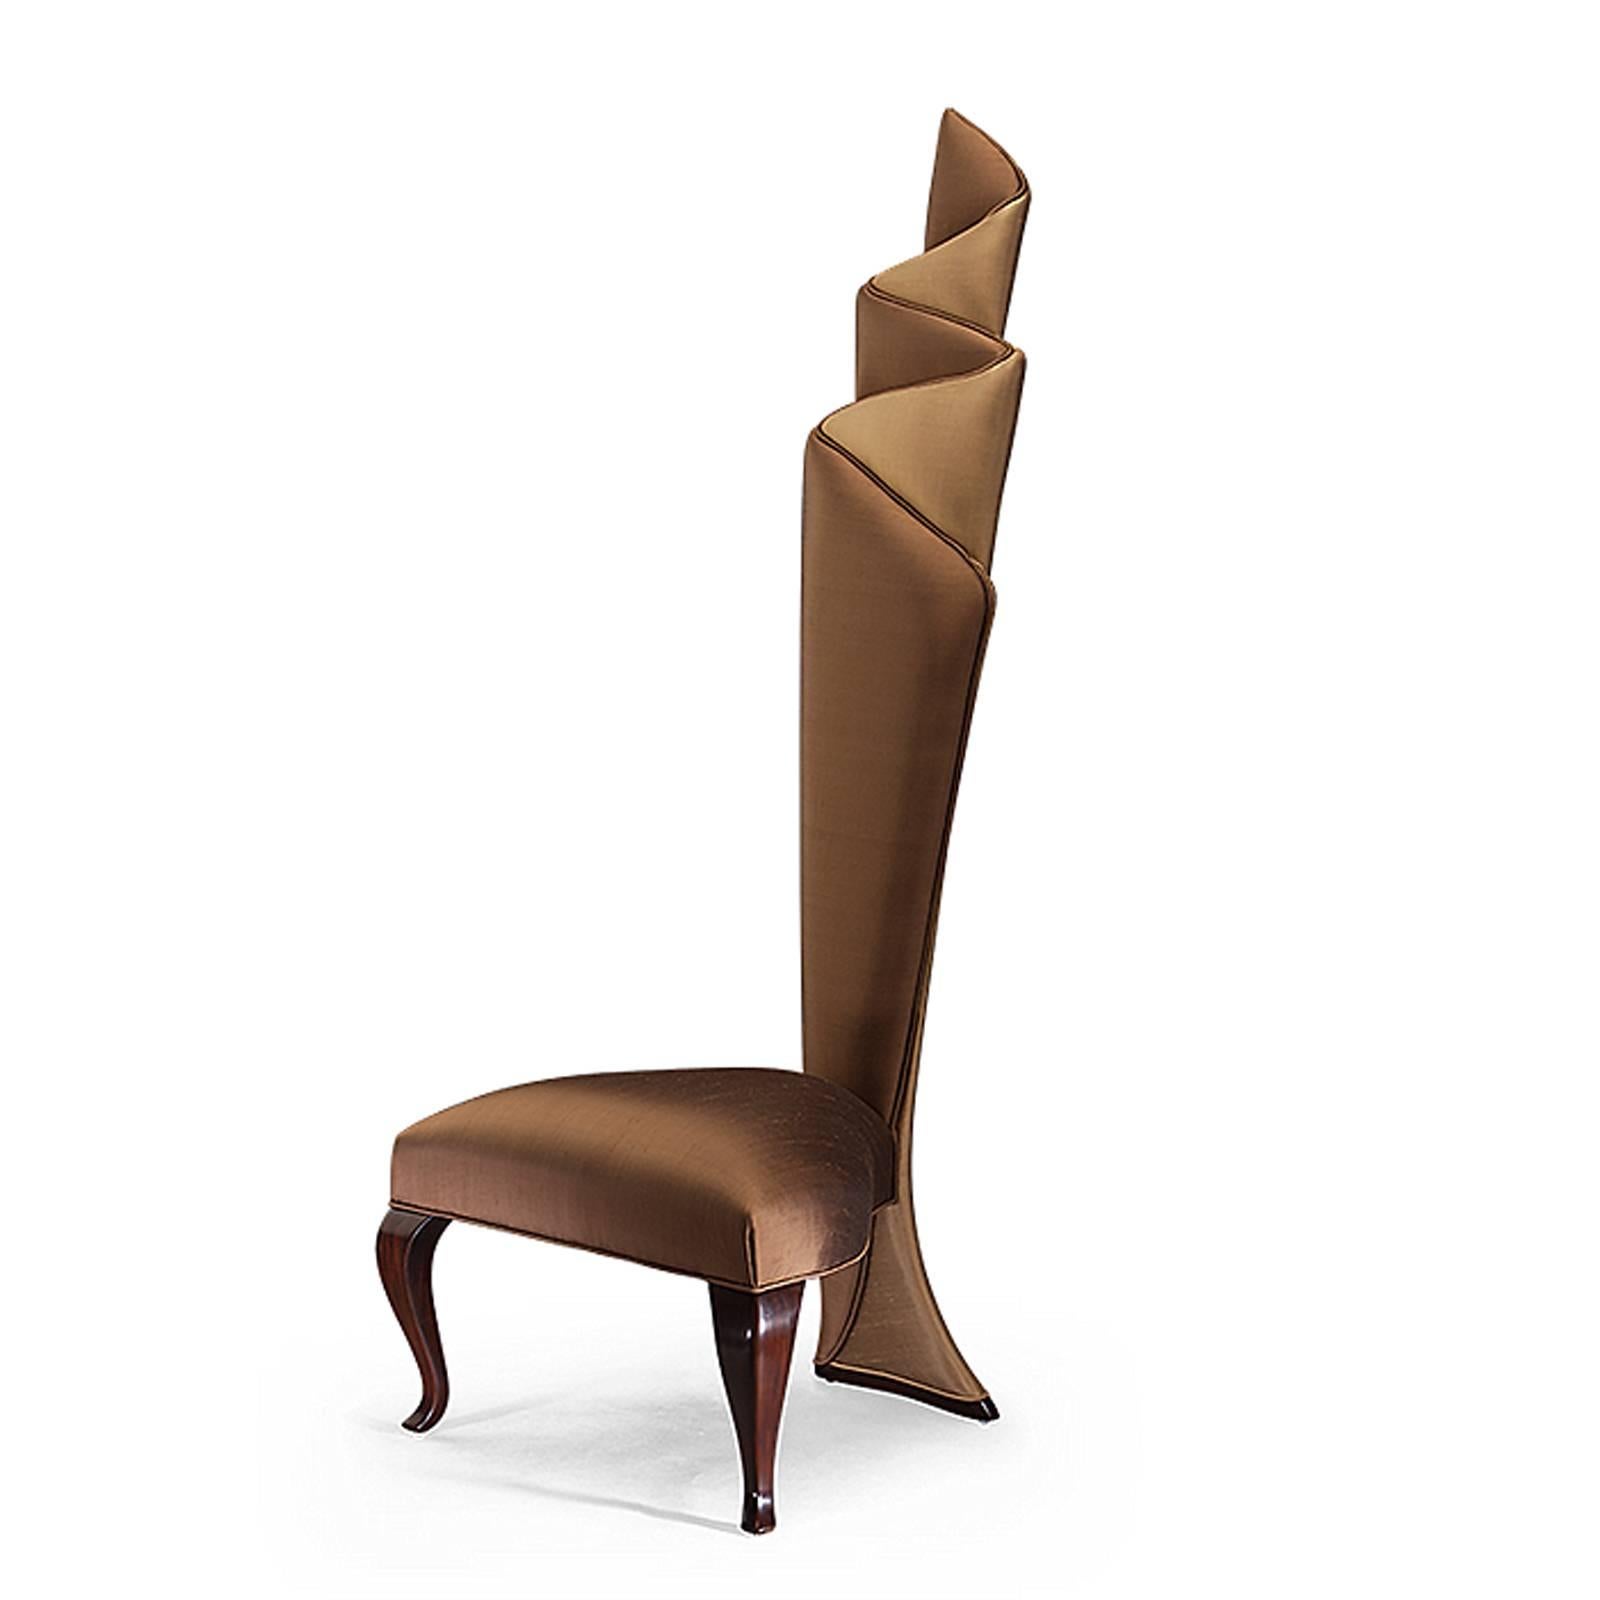 Hand-Carved Ribbon Chair in Solid Mahogany Wood and High Quality Fabric